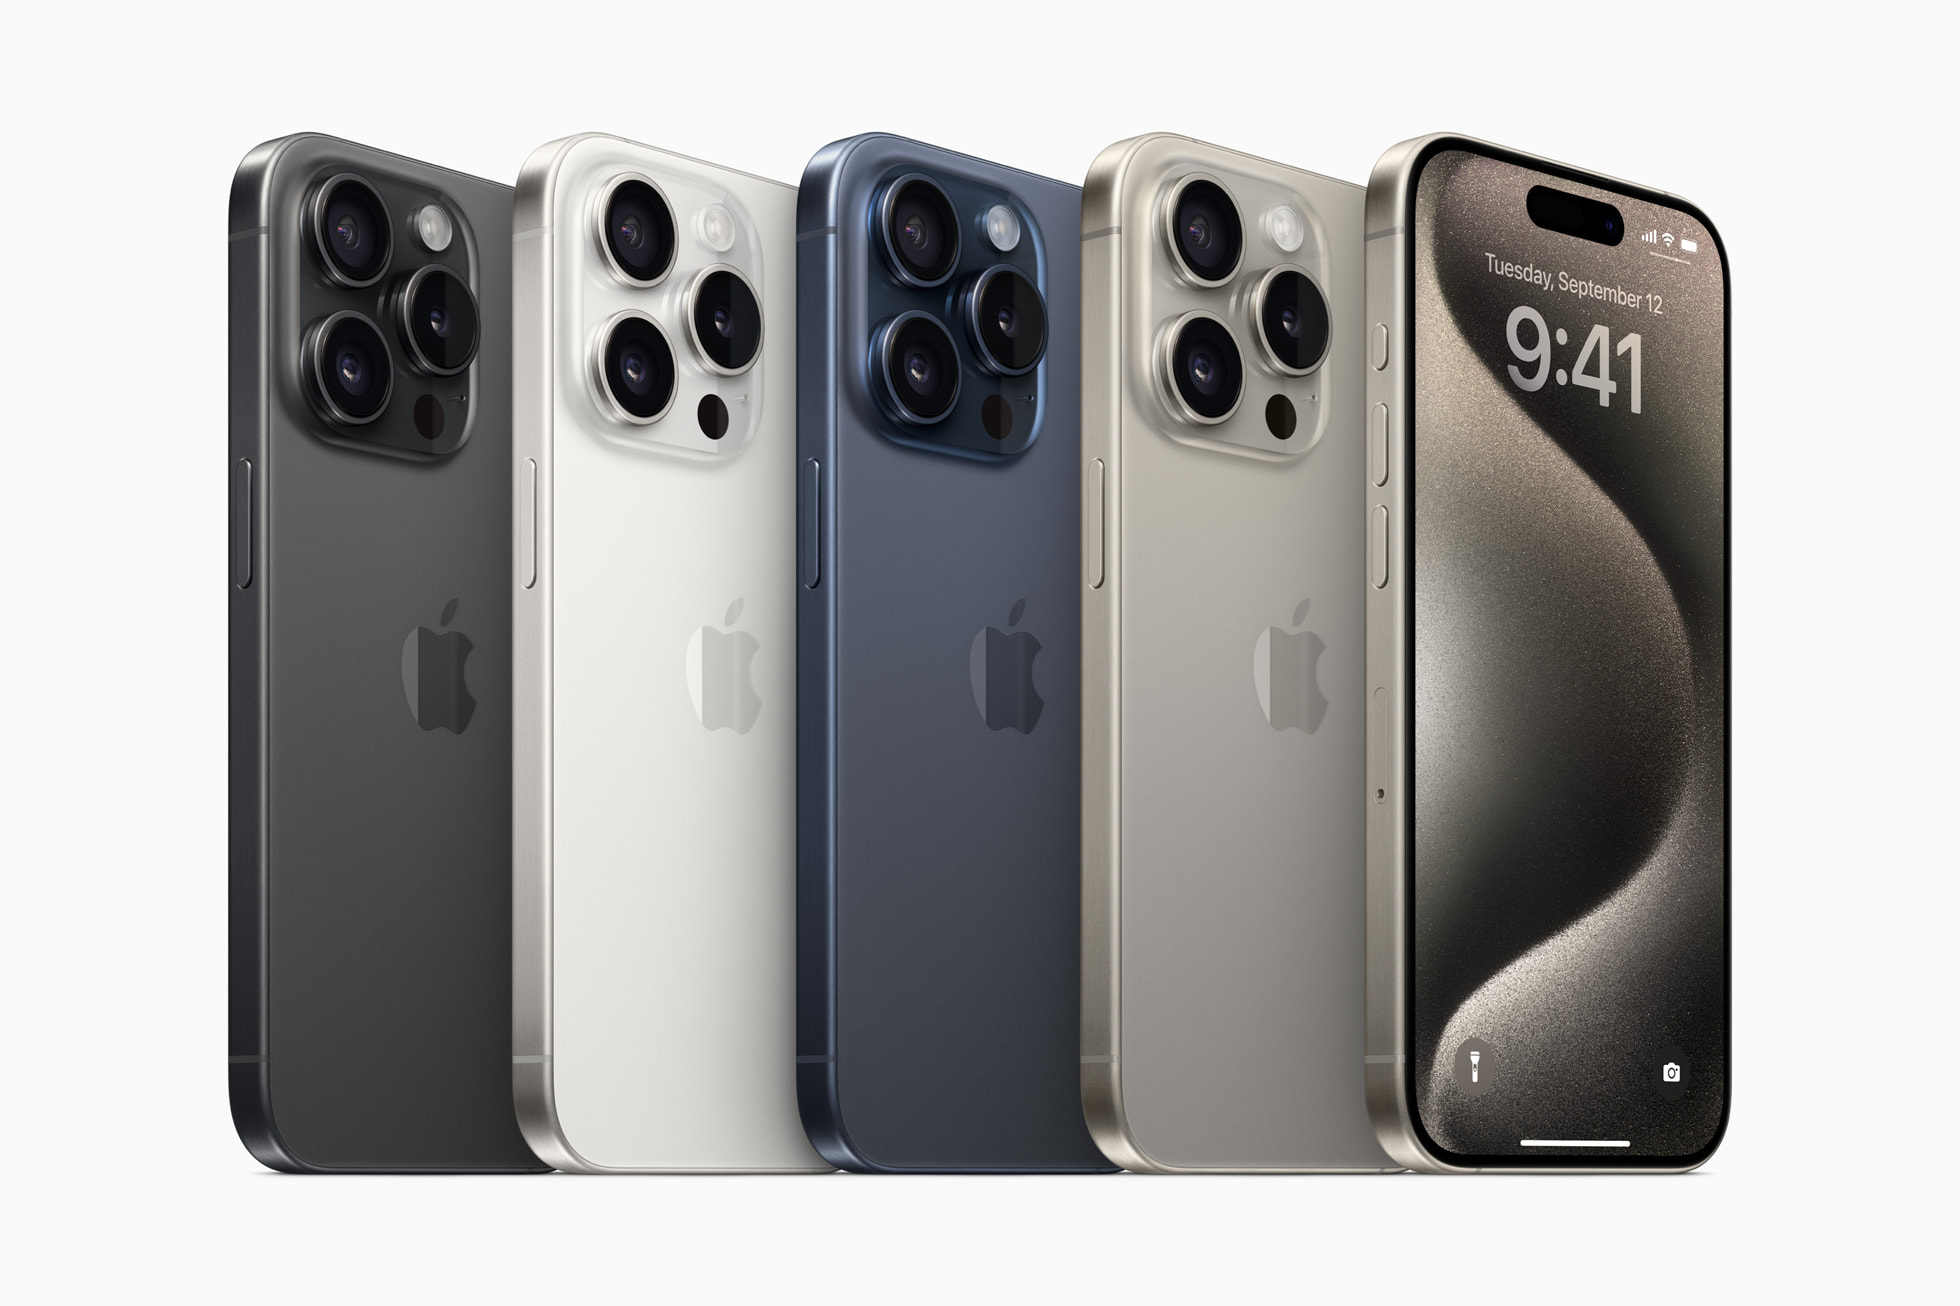 Apple iPhone Q1 Sales In China Fall 19 Percent | Silicon UK